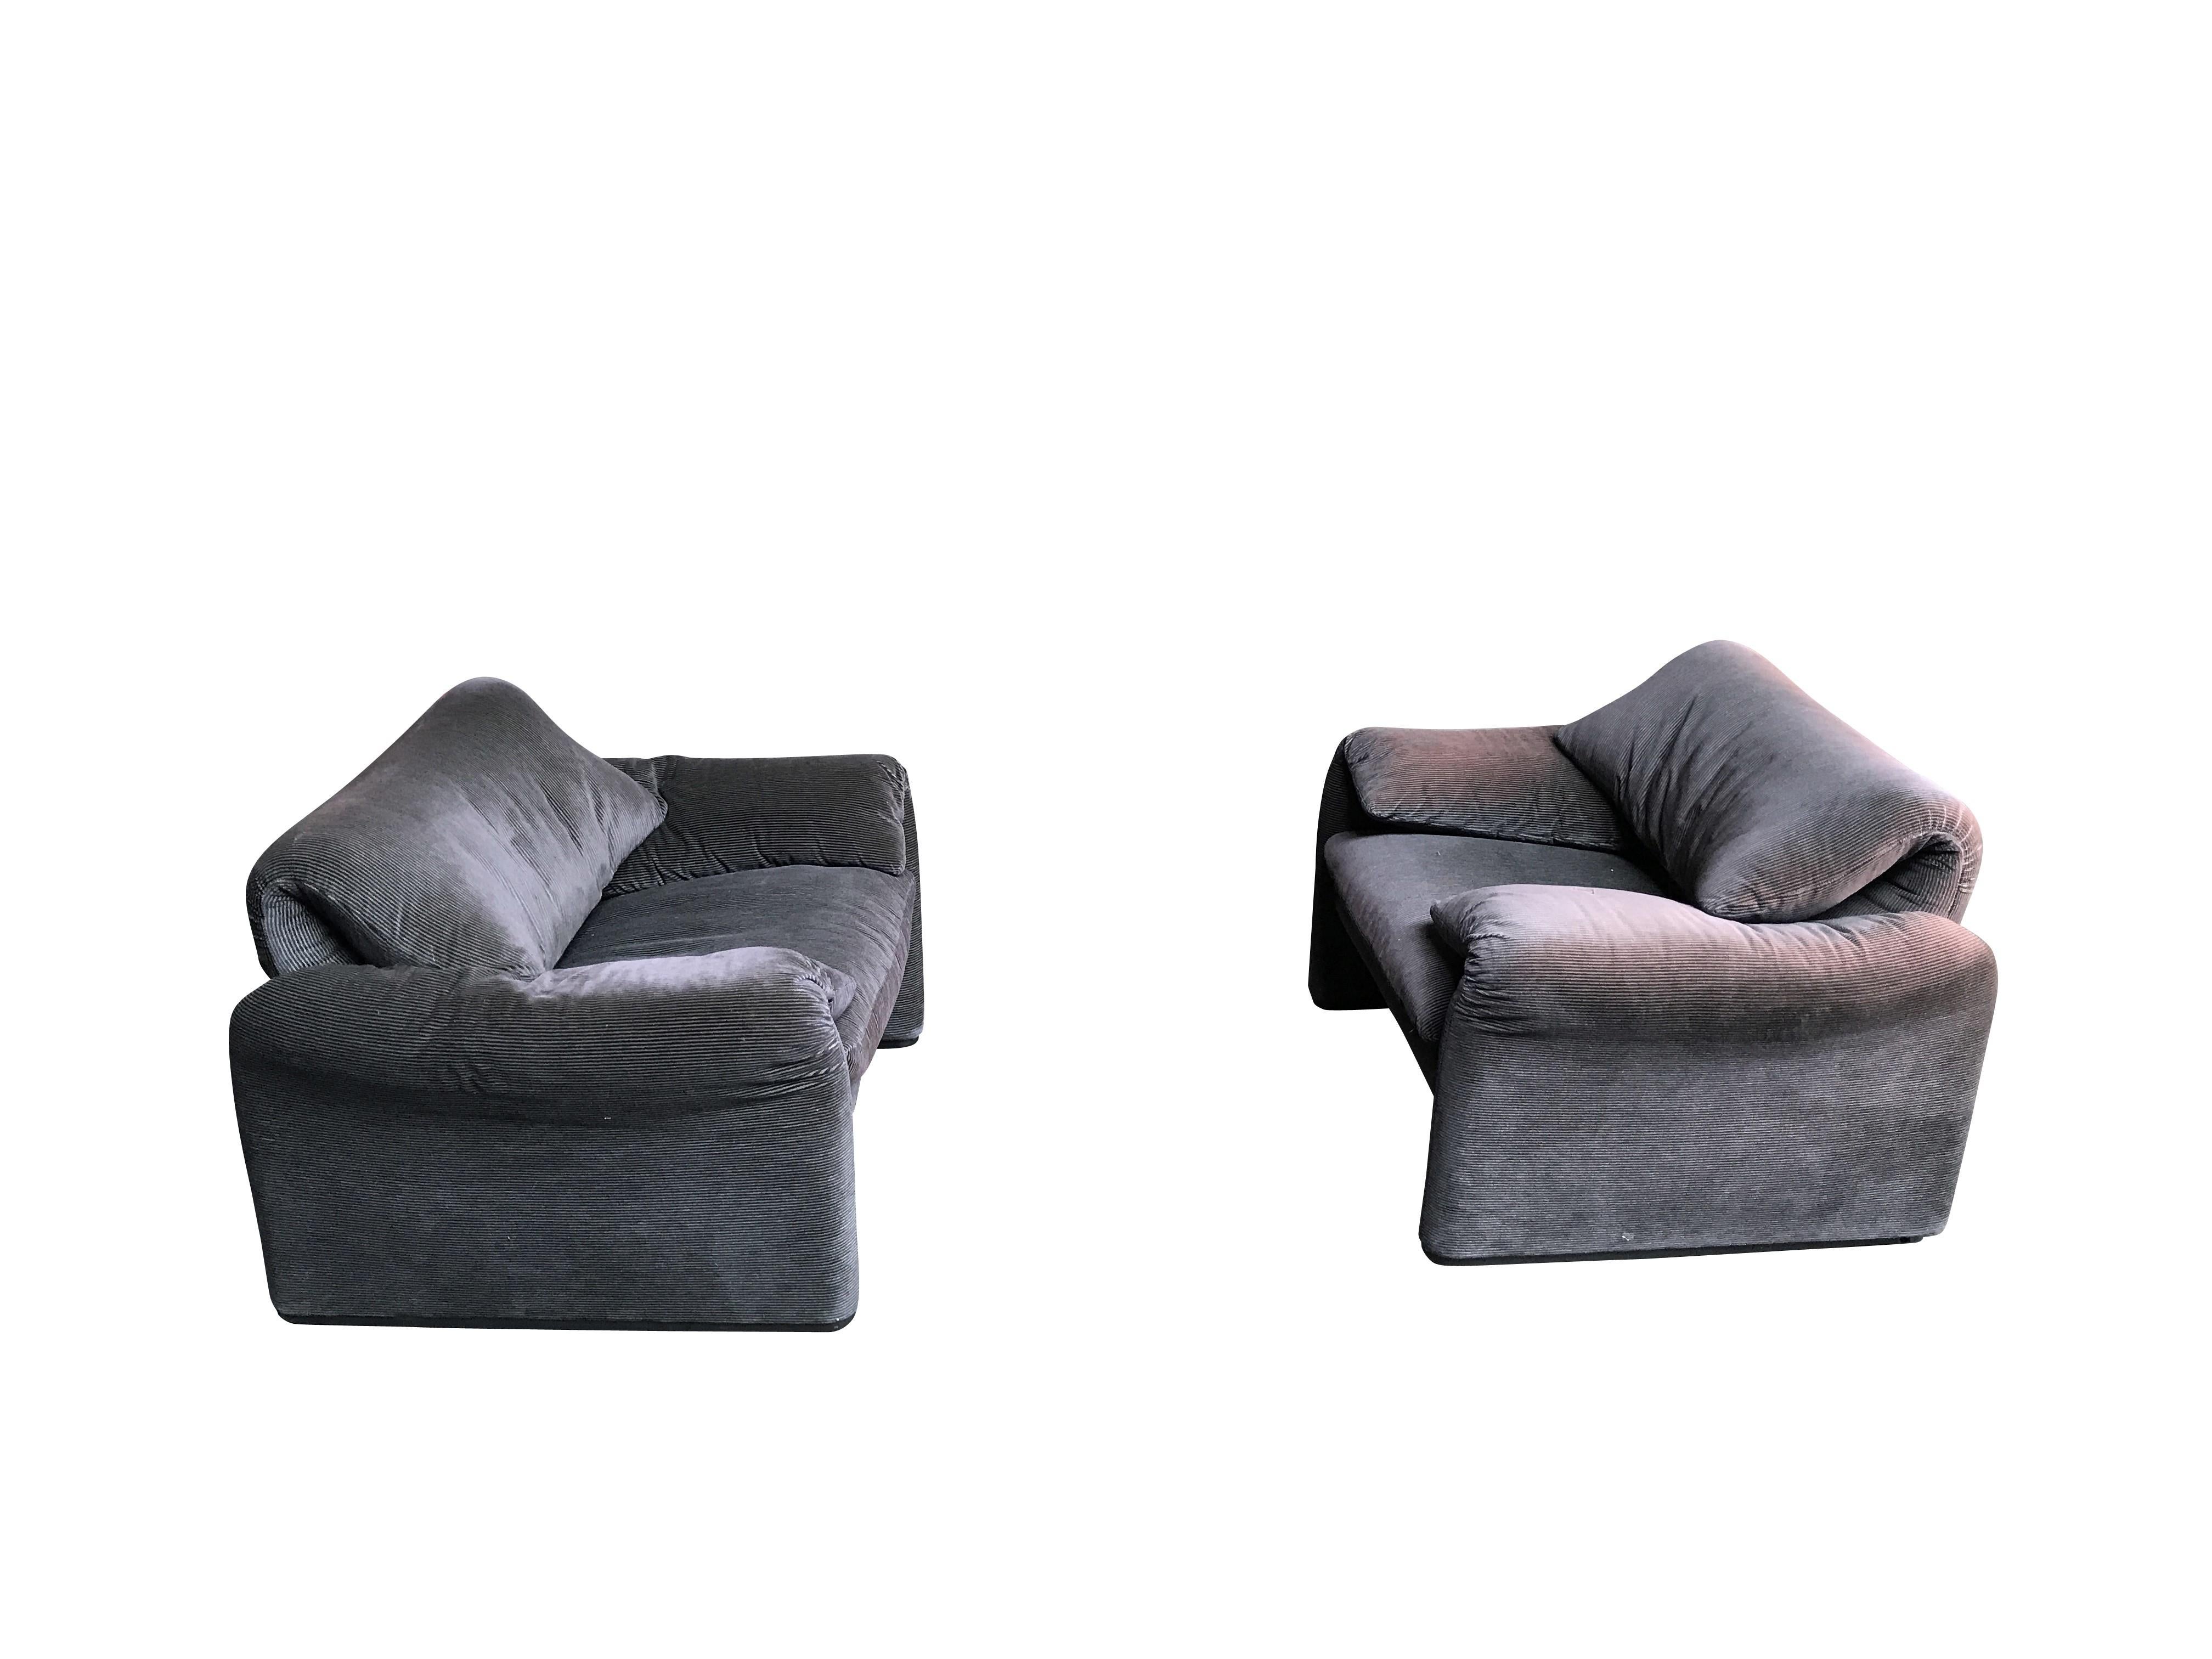 Mid-Century Modern Maralunga Armchairs by Vico Magistretti for Cassina, 1973, Set of Two